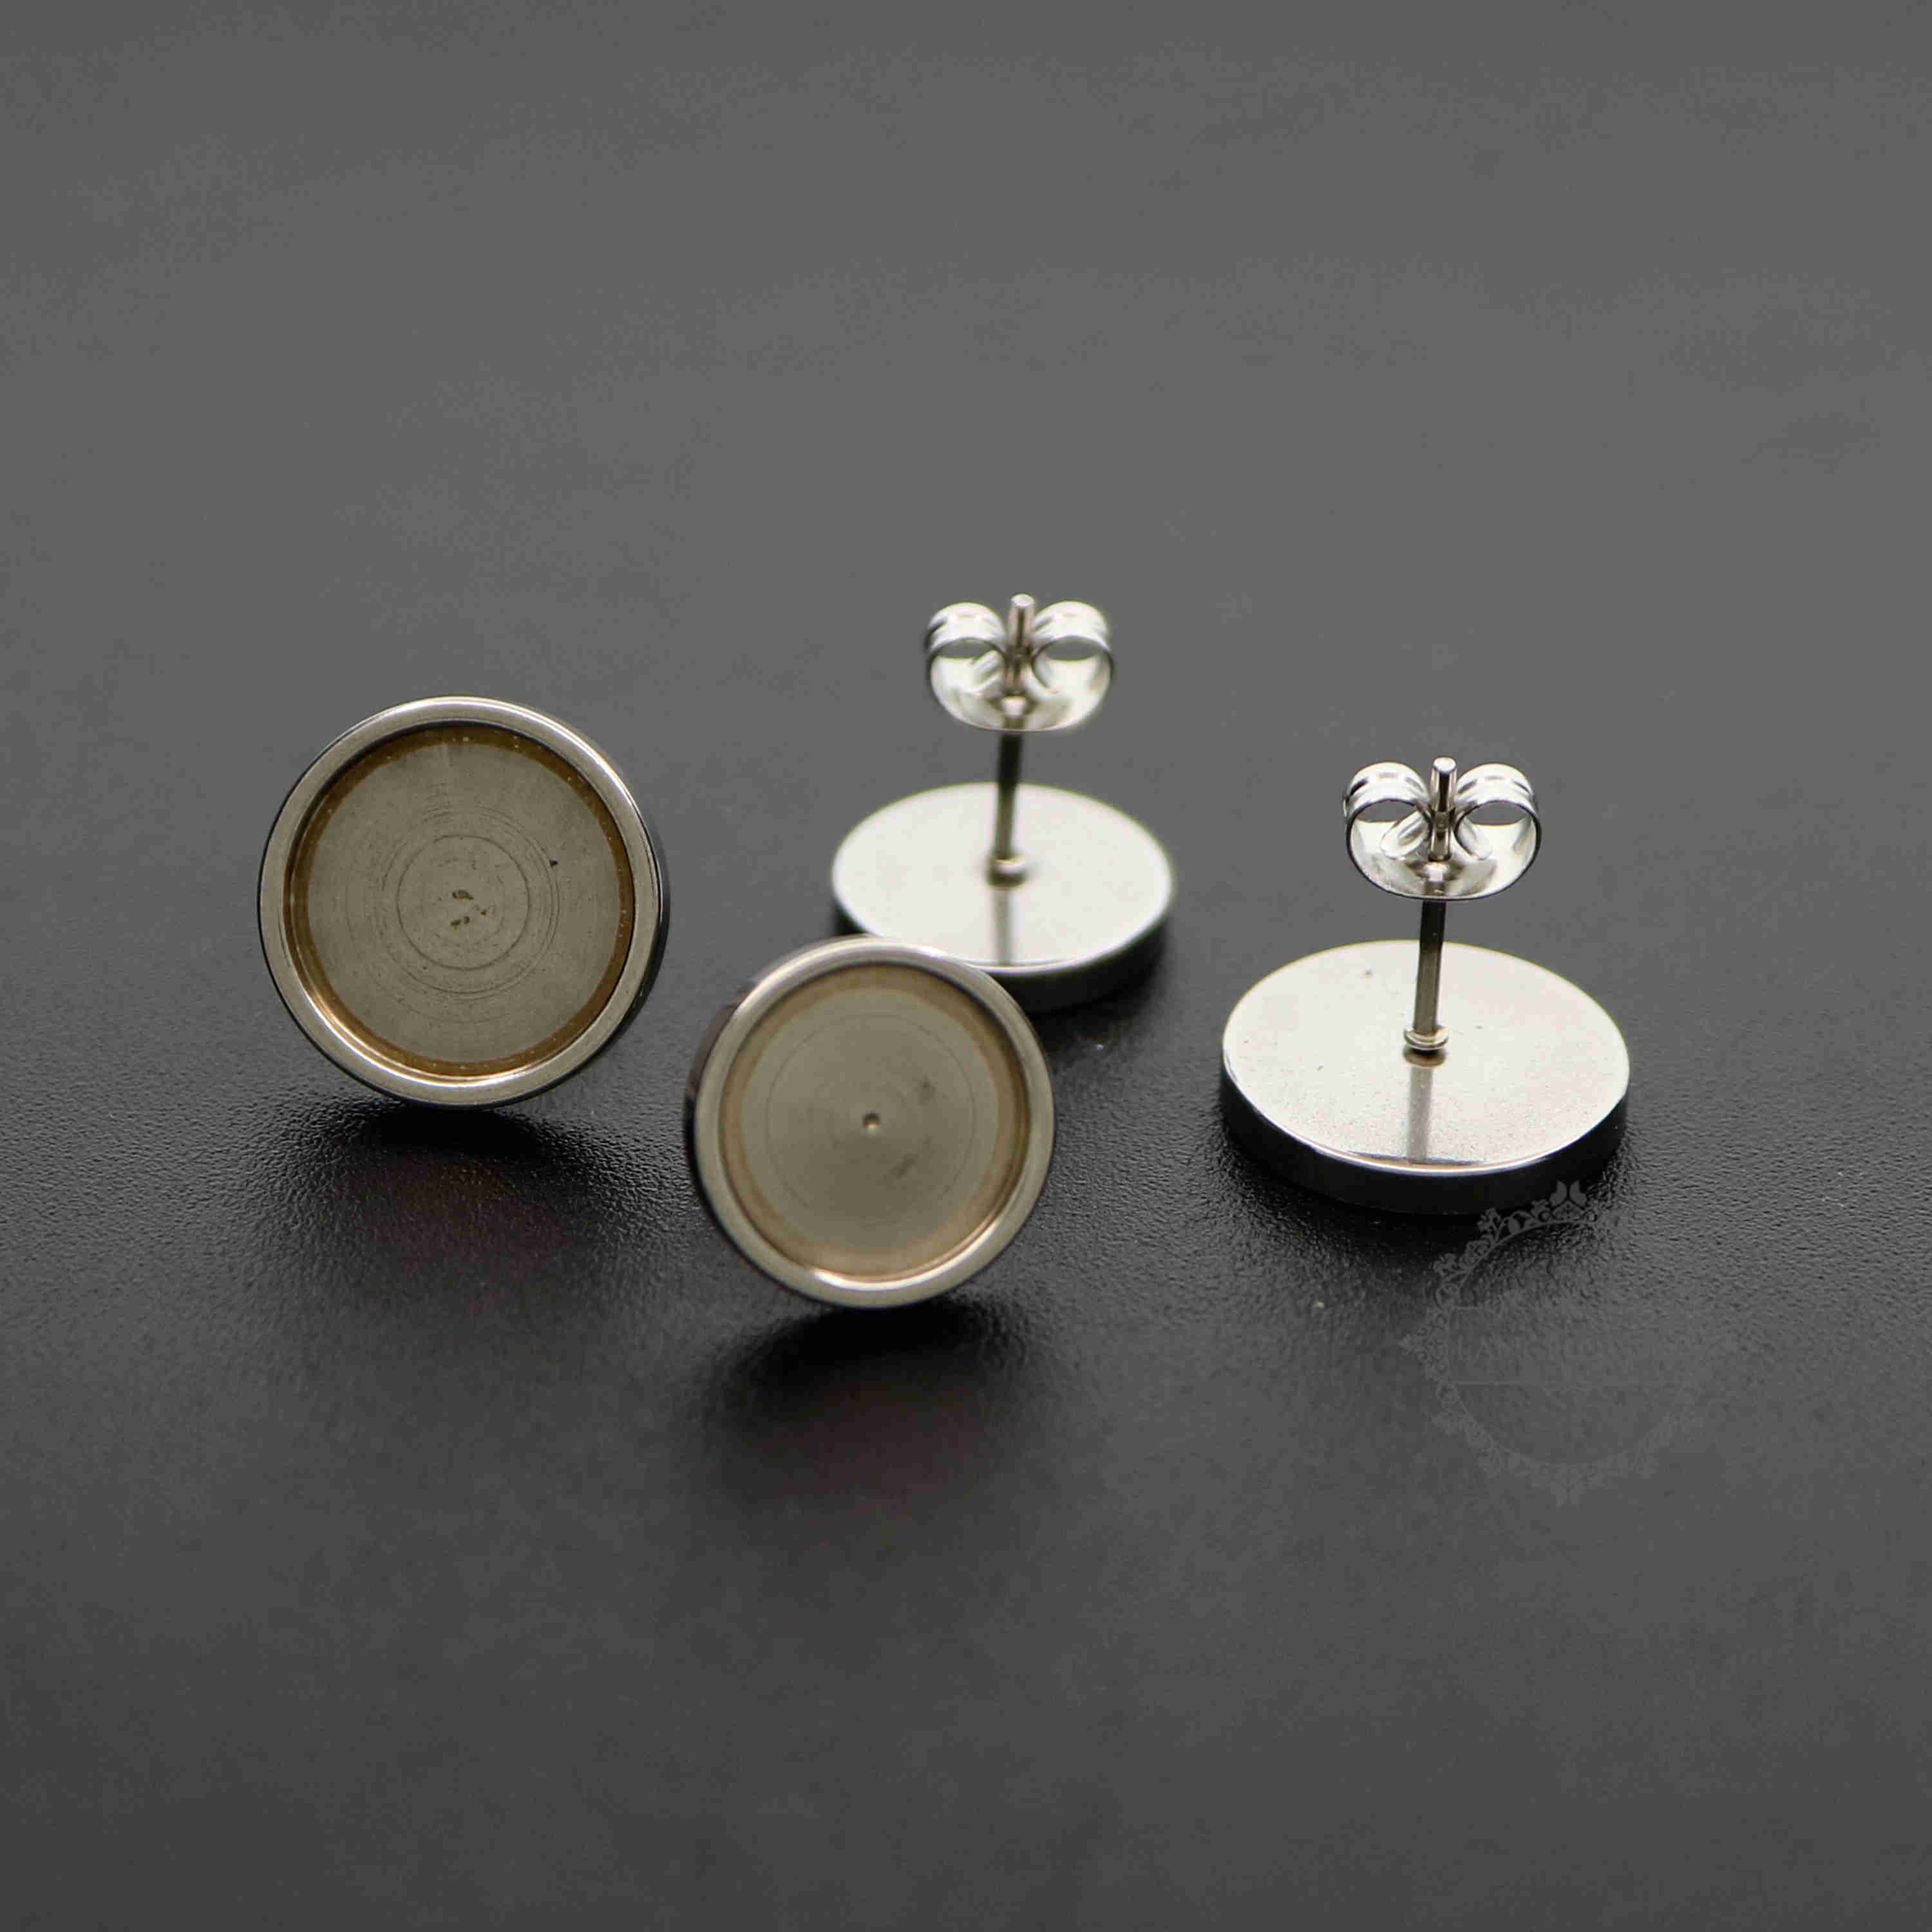 10pcs 6-12MM Silver Stainless Steel Round Bezel Studs Earrings Settings DIY Jewelry Supplies Findings 1702174 - Click Image to Close